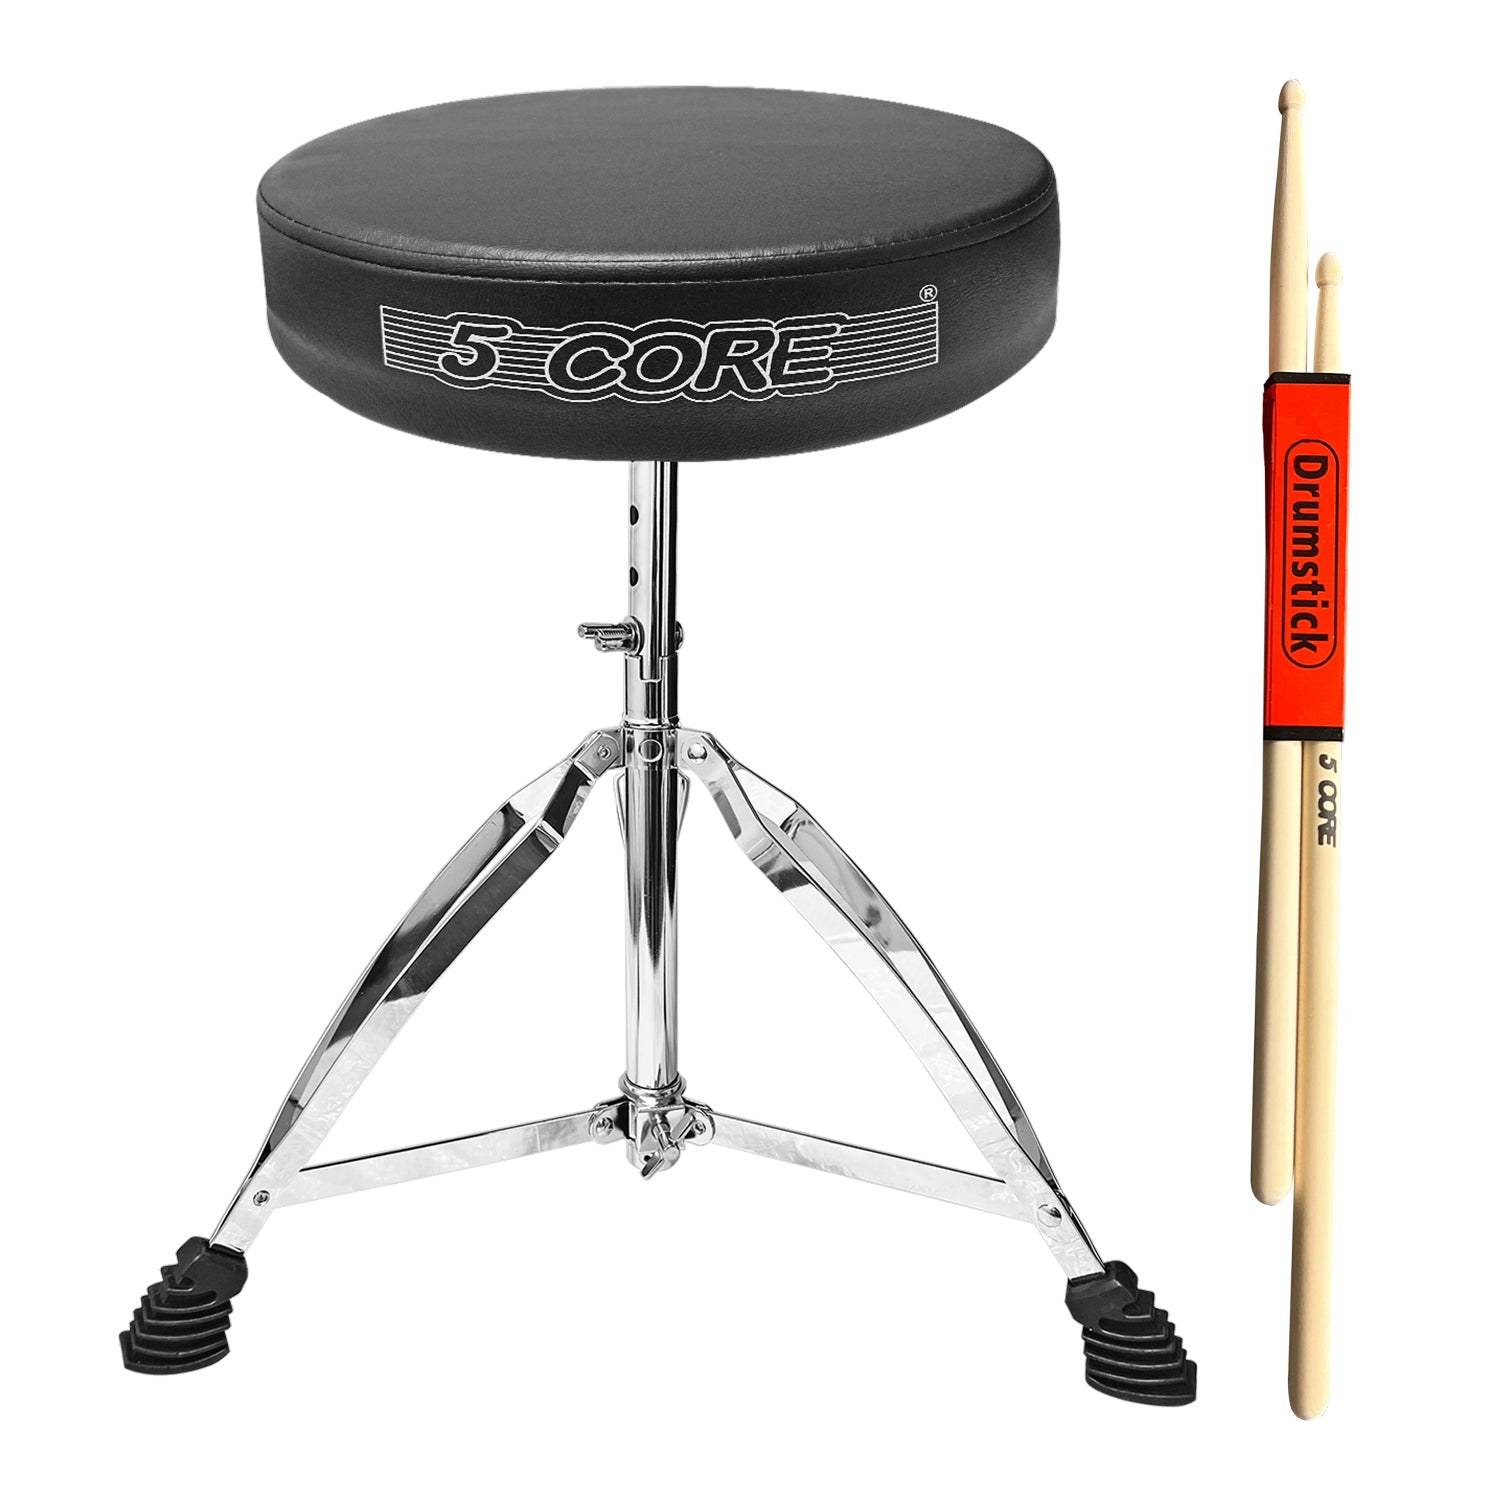 5 Core Drum Throne Black Height Adjustable Guitar Stool Thick Padded Memory Foam DJ Chair Seat